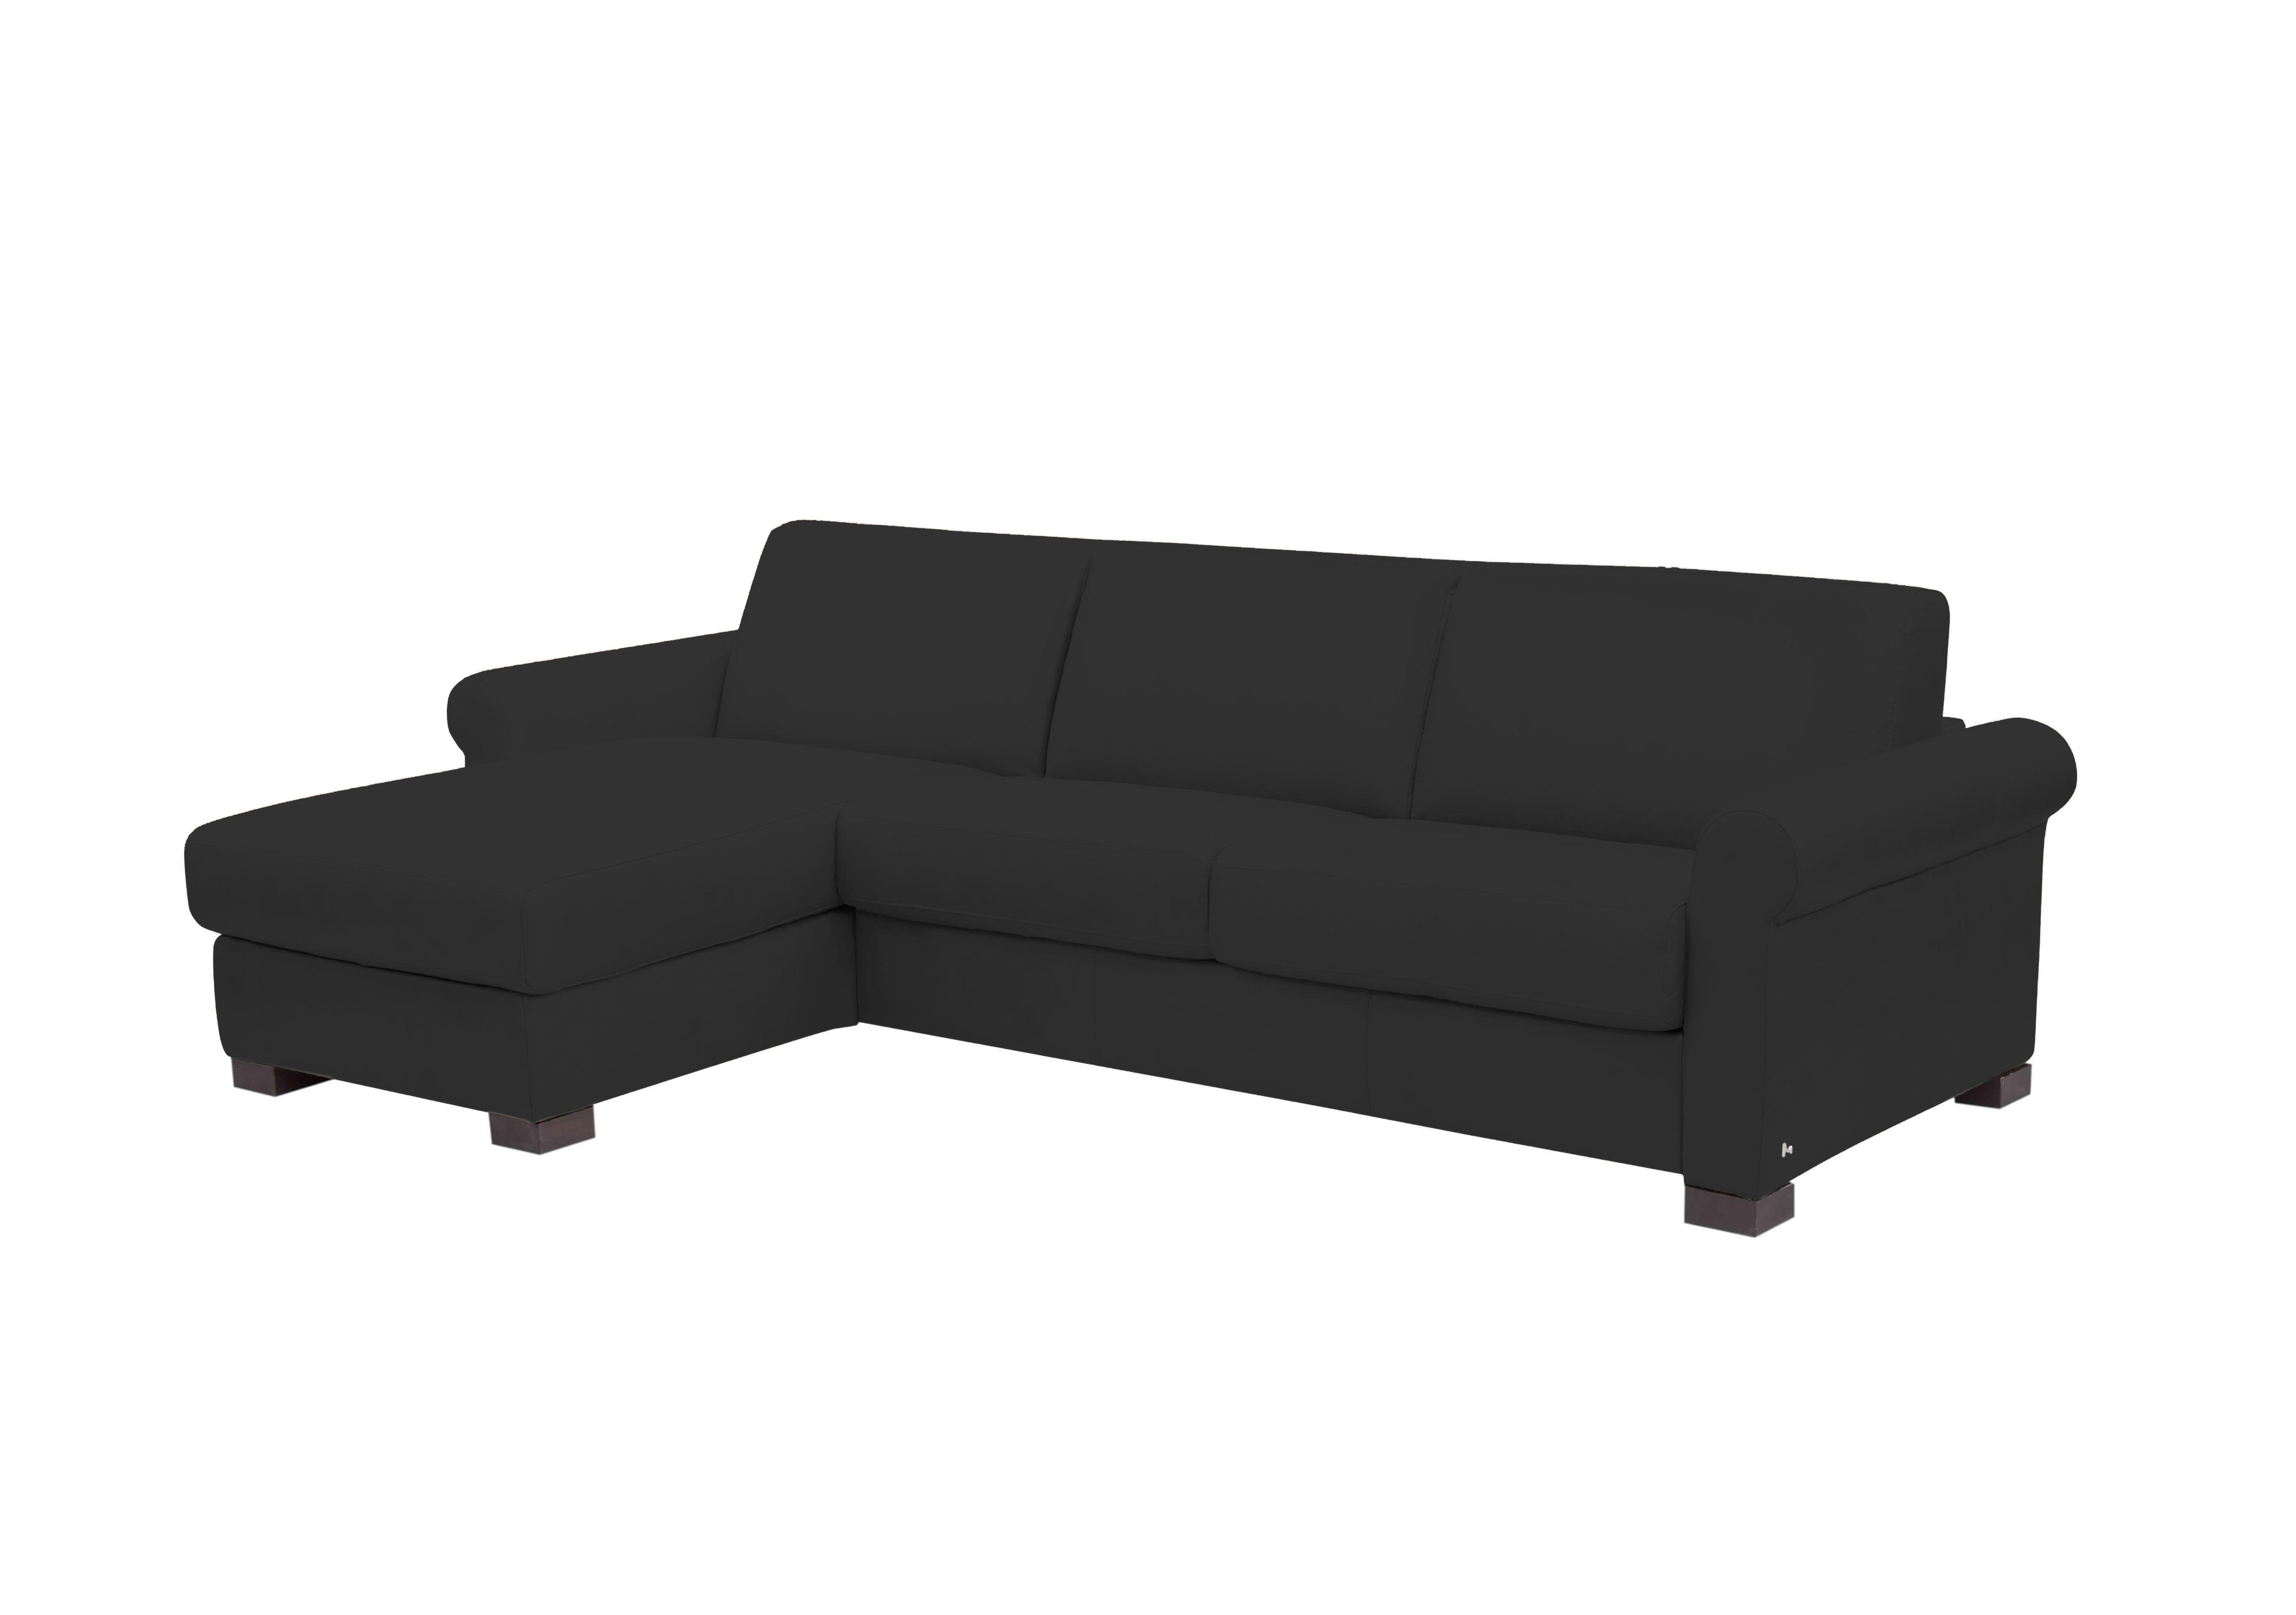 Alcova 3 Seater Leather Sofa Bed with Storage Chaise with Scroll Arms in Torello Nero 71 on Furniture Village